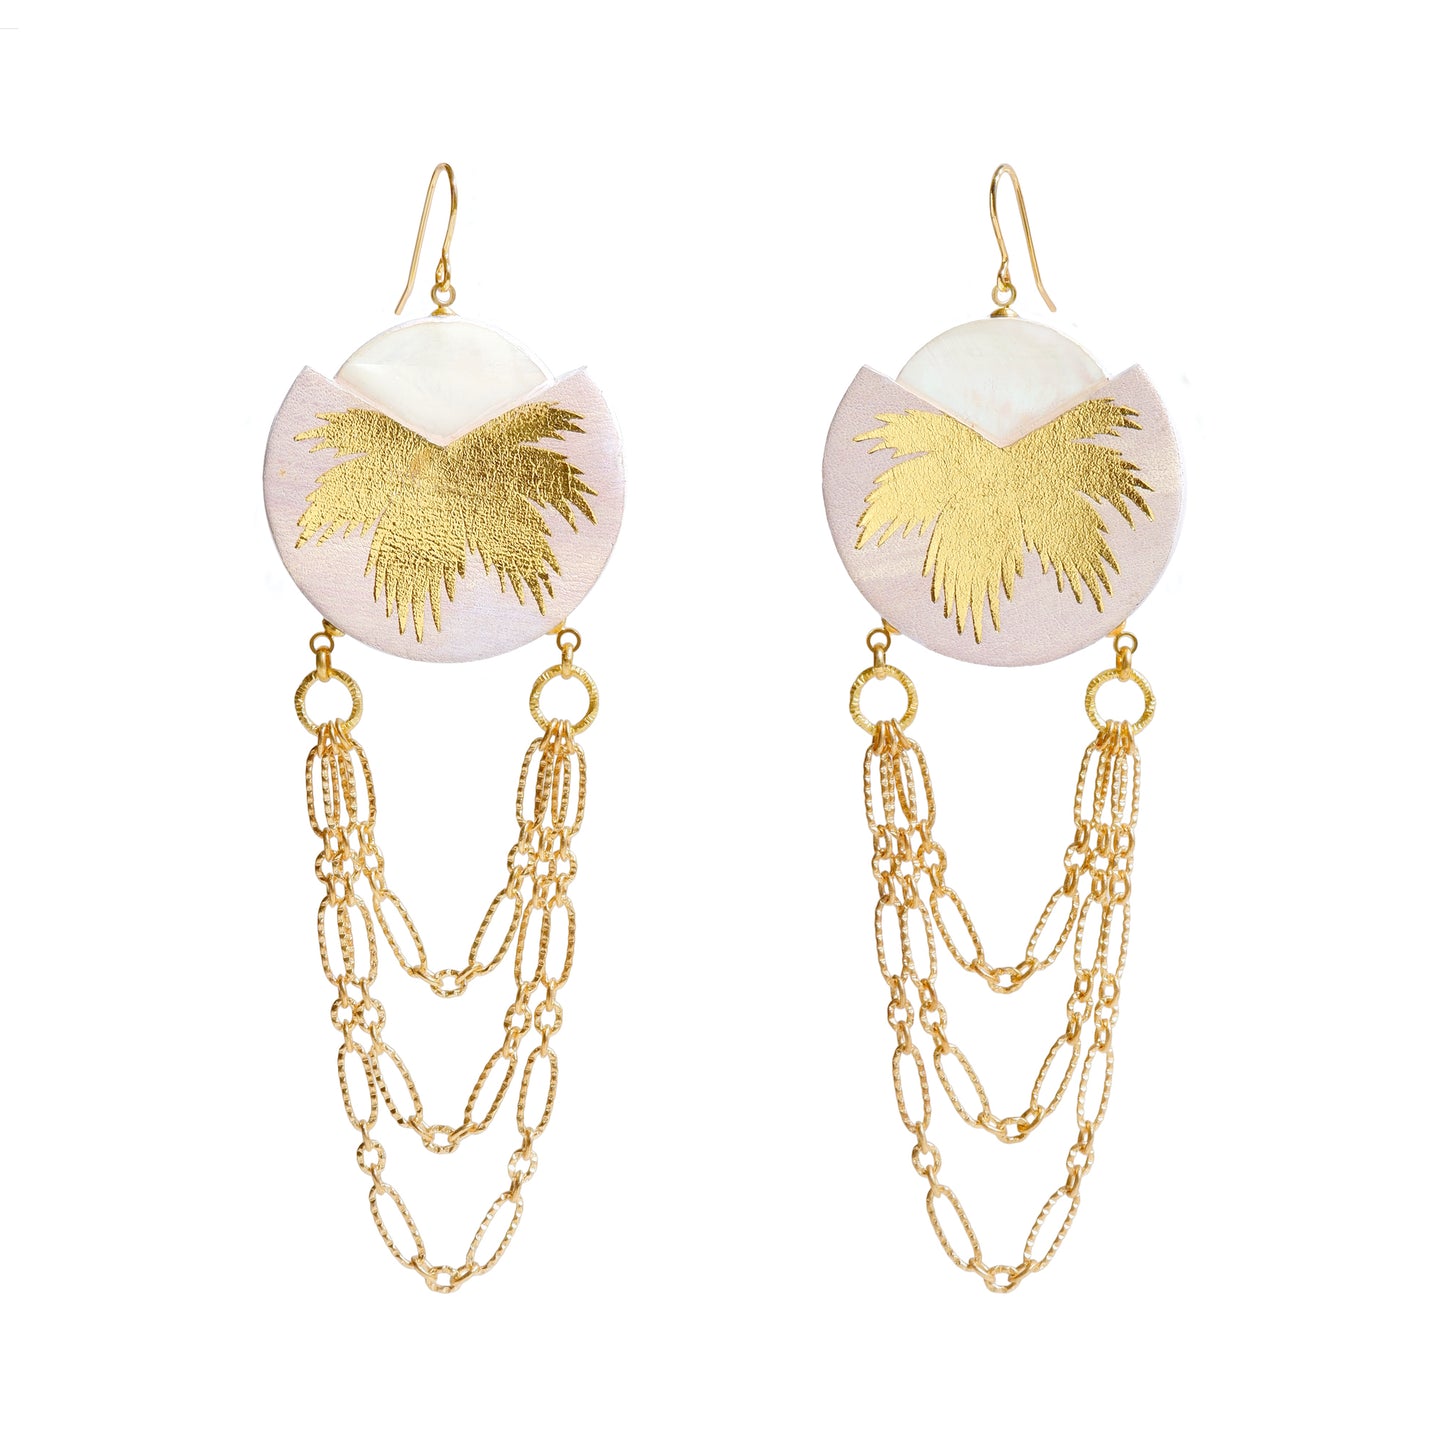 Lilac & gold leather palm tree chain swag chandelier earrings with mother of pearl